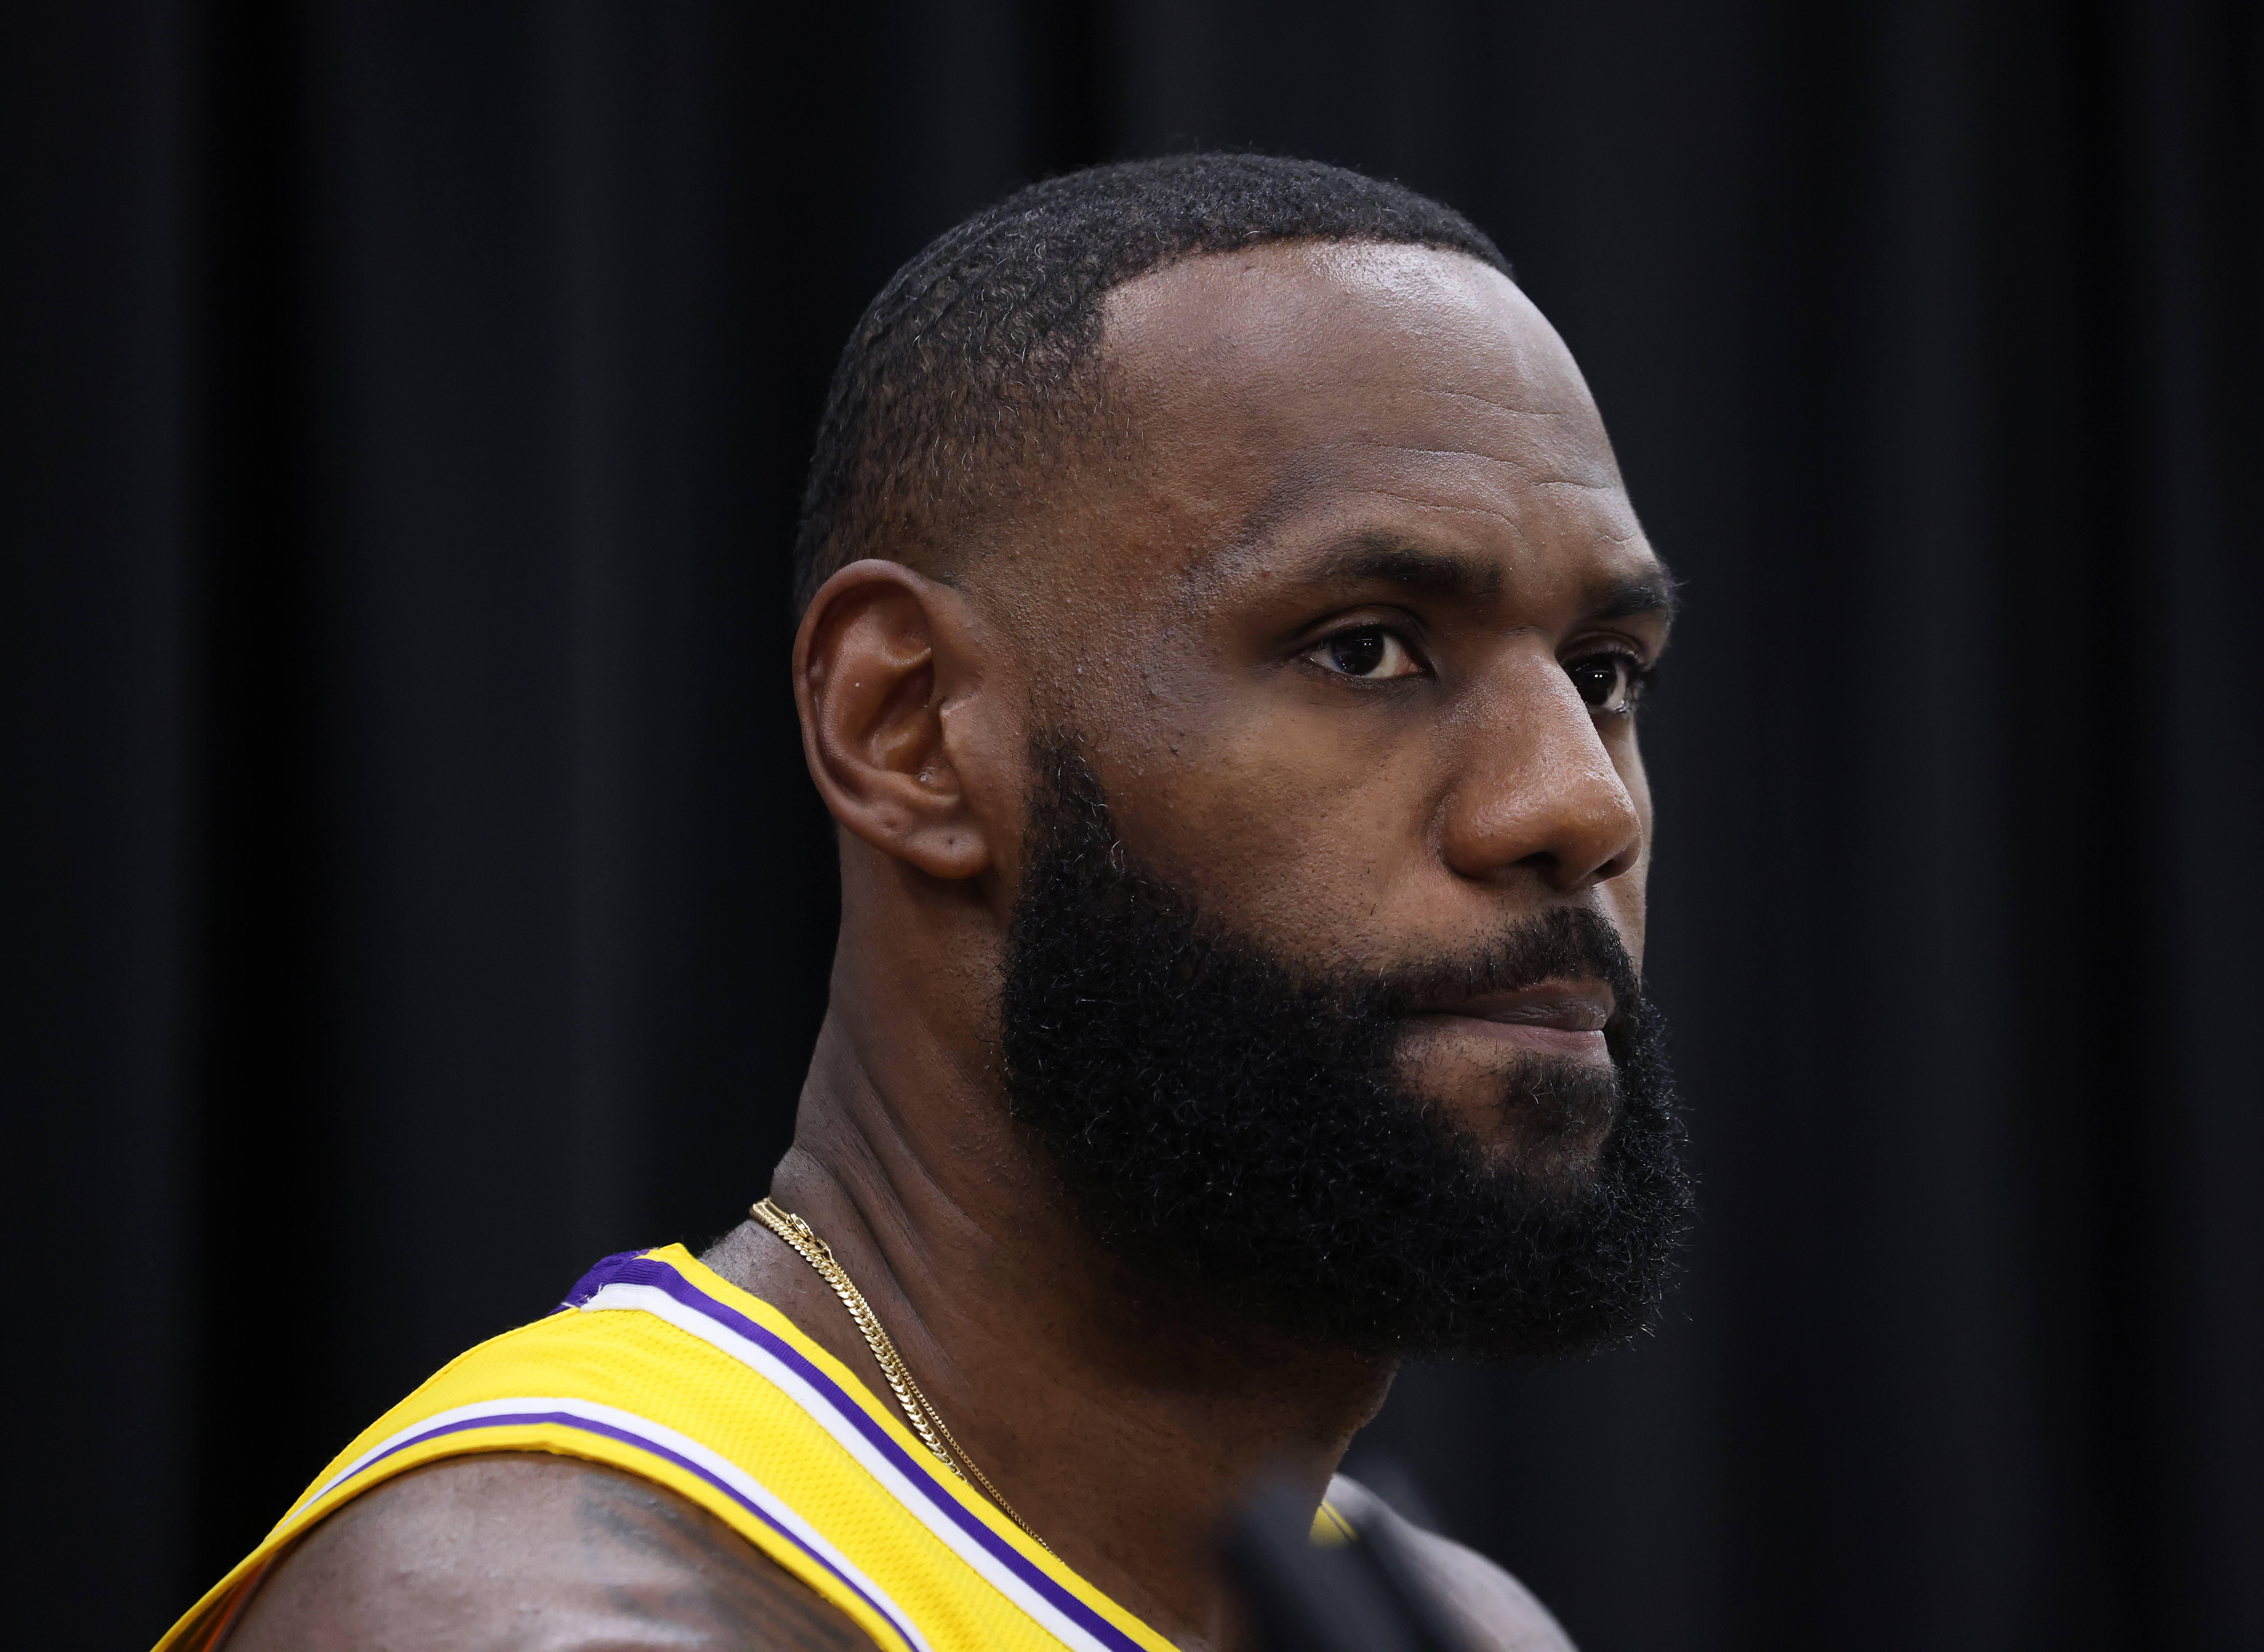 Lakers star and four-time NBA MVP LeBron James answers questions at Los Angeles Lakers Media Day